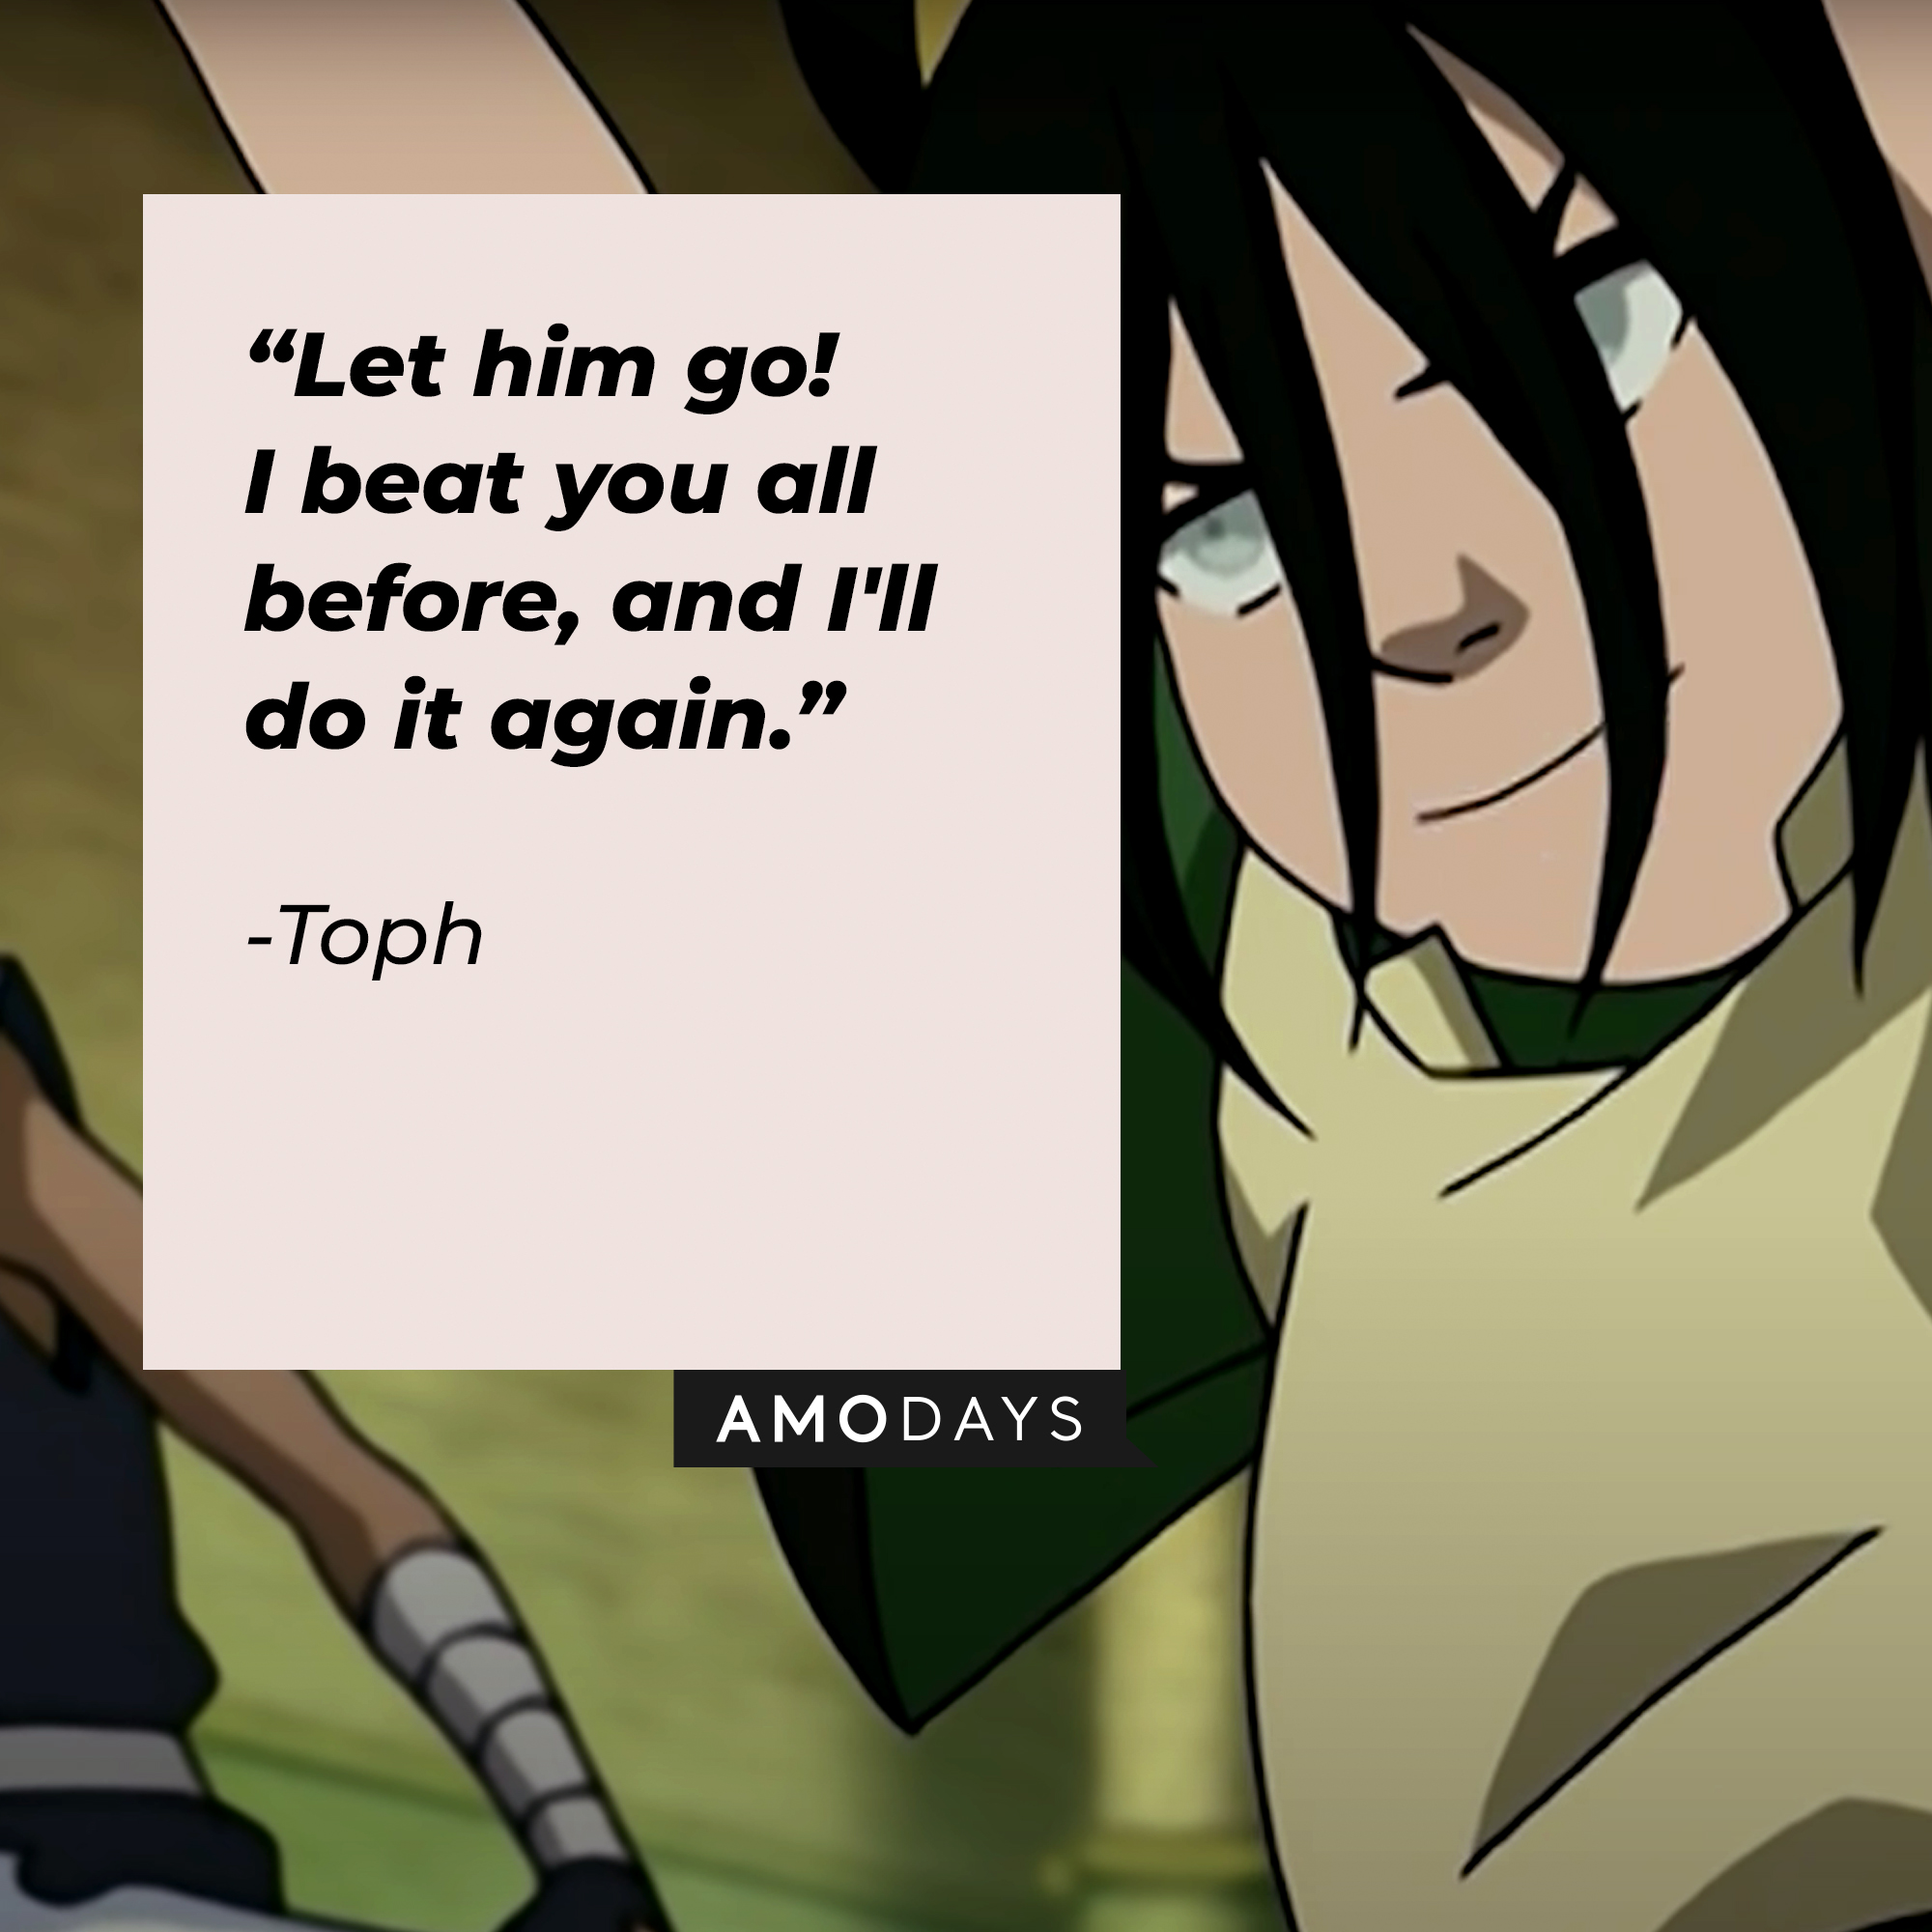 Toph's quote: “Let him go! I beat you all before, and I'll do it again.” | Source: youtube.com/TeamAvatar